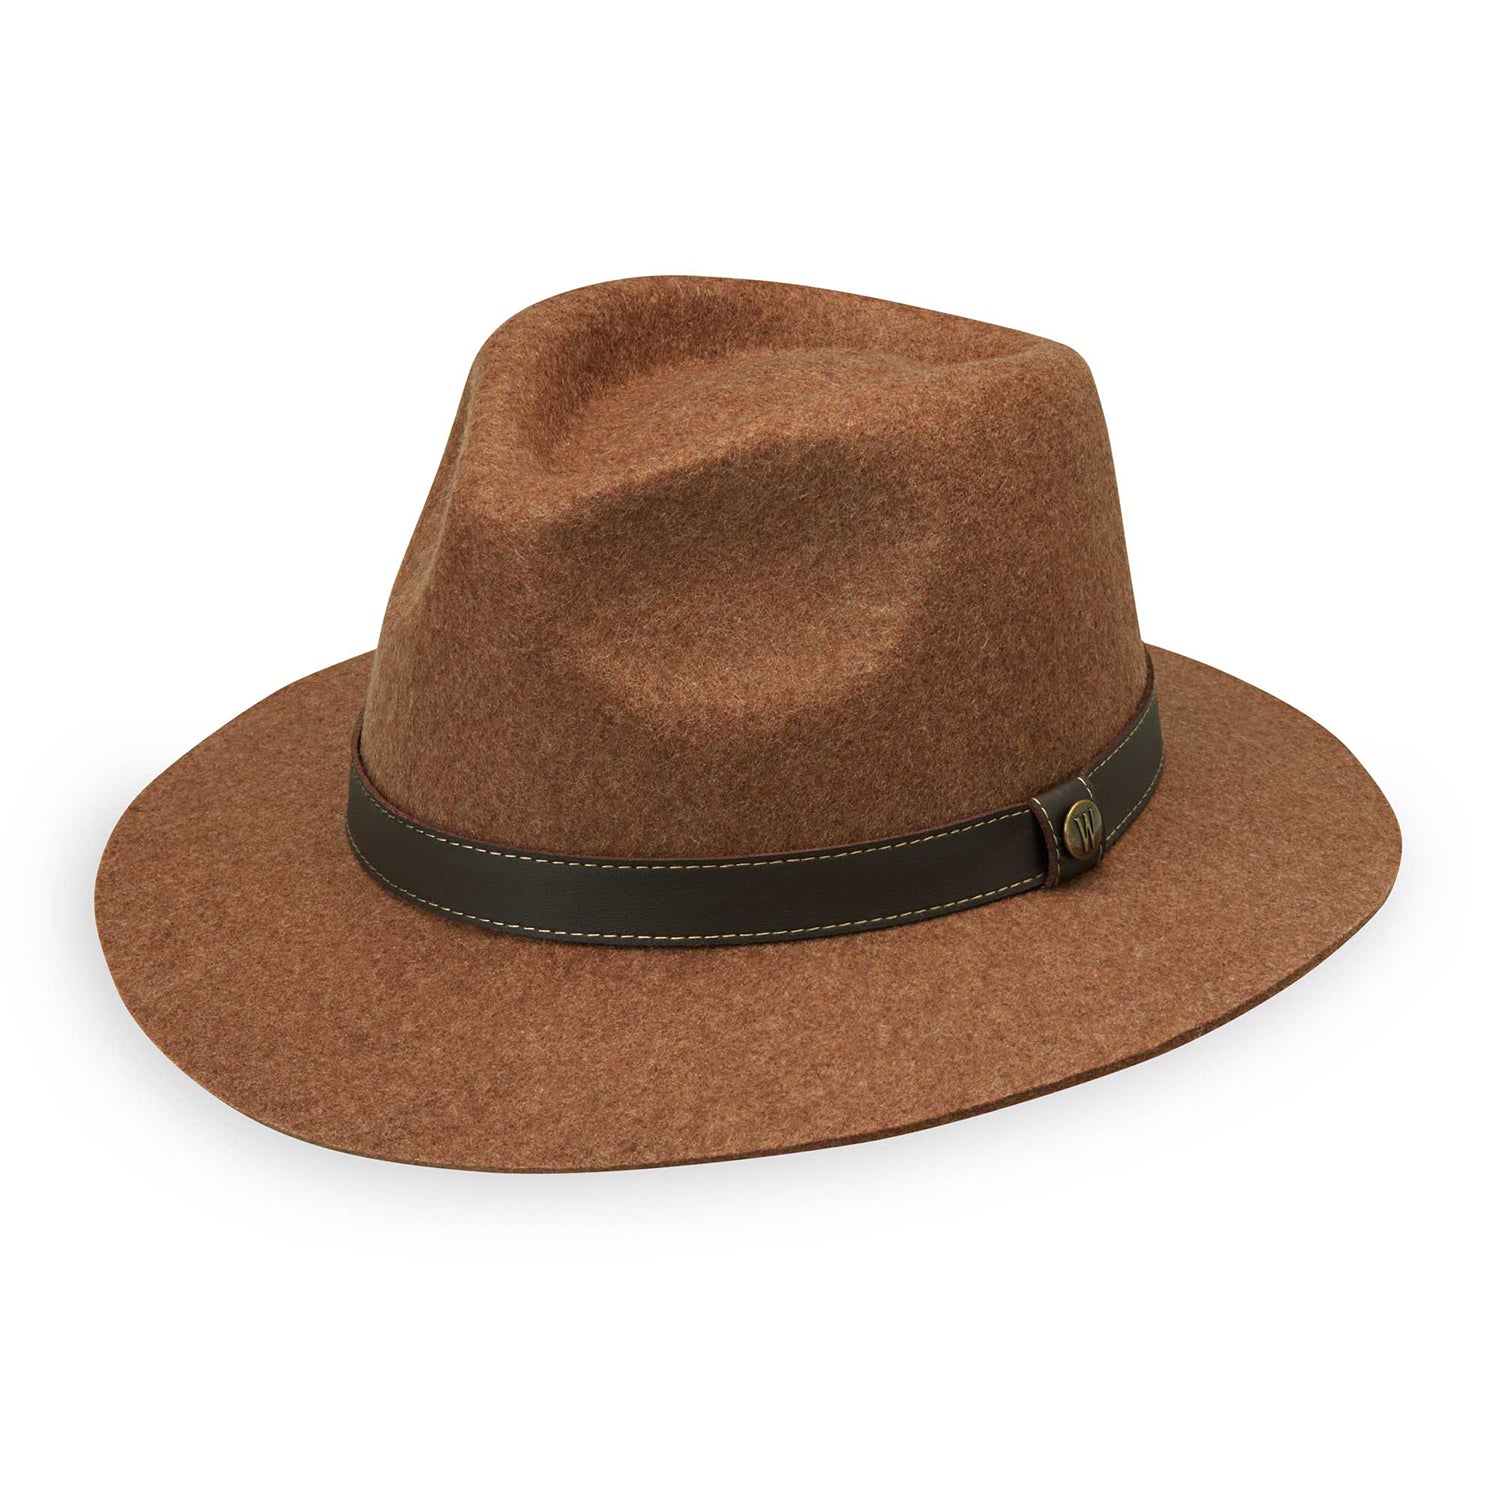 Featuring Durango unisex fedora sun hat, featuring a UPF 50+ rating and made of wool-felt material